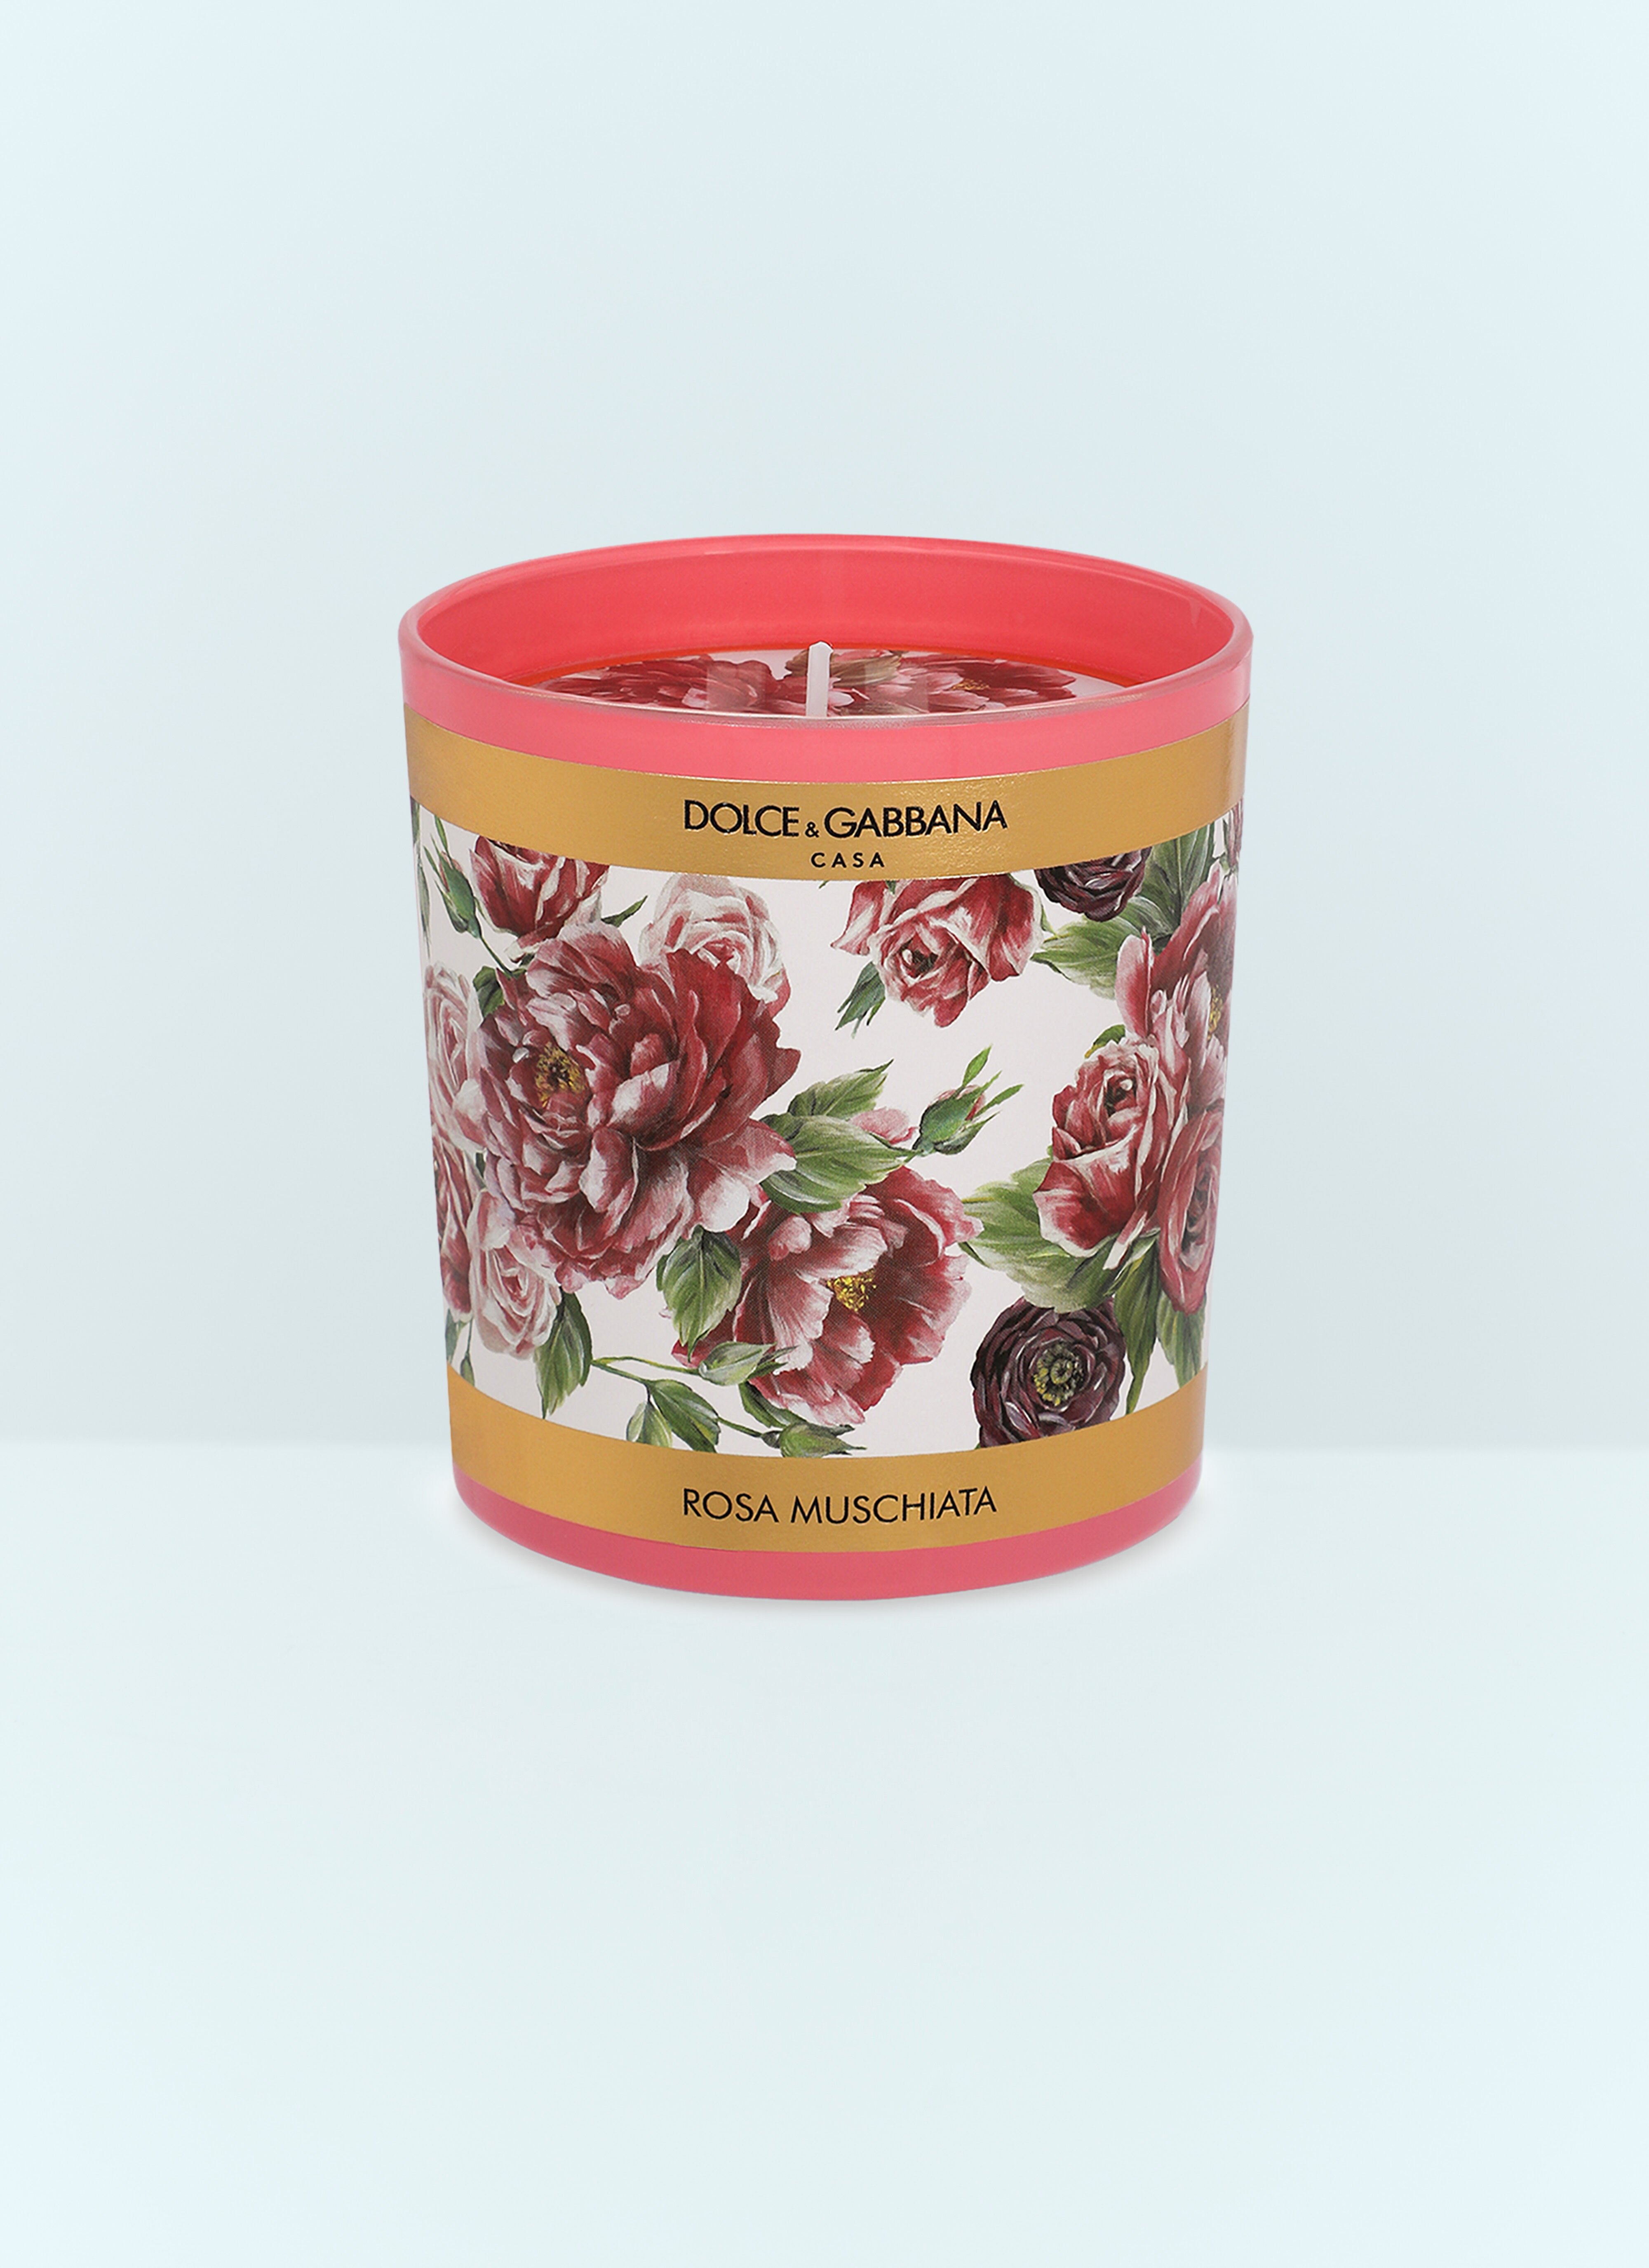 Dolce & Gabbana Casa Musk Rose Scented Candle Blue wps0691218